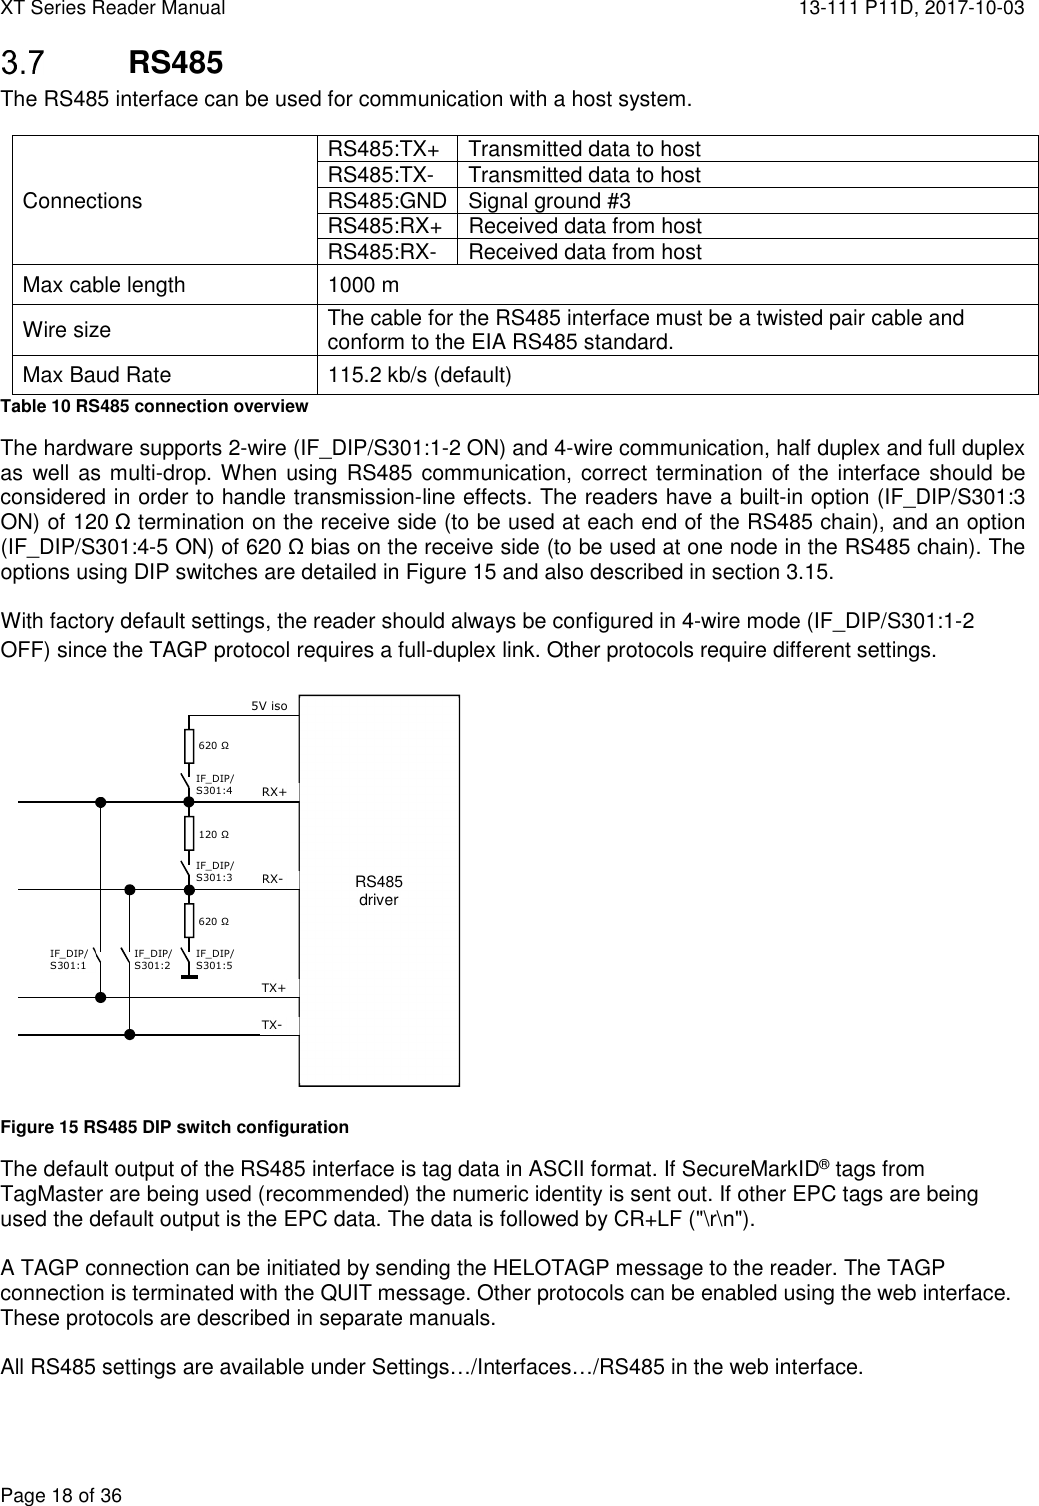 XT Series Reader Manual  13-111 P11D, 2017-10-03  Page 18 of 36  RS485 The RS485 interface can be used for communication with a host system.  Connections RS485:TX+ Transmitted data to host RS485:TX- Transmitted data to host RS485:GND Signal ground #3 RS485:RX+  Received data from host RS485:RX- Received data from host Max cable length  1000 m Wire size  The cable for the RS485 interface must be a twisted pair cable and conform to the EIA RS485 standard. Max Baud Rate  115.2 kb/s (default) Table 10 RS485 connection overview The hardware supports 2-wire (IF_DIP/S301:1-2 ON) and 4-wire communication, half duplex and full duplex as well as multi-drop. When using RS485 communication, correct termination of the interface should be considered in order to handle transmission-line effects. The readers have a built-in option (IF_DIP/S301:3 ON) of 120 Ω termination on the receive side (to be used at each end of the RS485 chain), and an option (IF_DIP/S301:4-5 ON) of 620 Ω bias on the receive side (to be used at one node in the RS485 chain). The options using DIP switches are detailed in Figure 15 and also described in section 3.15.  With factory default settings, the reader should always be configured in 4-wire mode (IF_DIP/S301:1-2 OFF) since the TAGP protocol requires a full-duplex link. Other protocols require different settings.  Figure 15 RS485 DIP switch configuration The default output of the RS485 interface is tag data in ASCII format. If SecureMarkID® tags from TagMaster are being used (recommended) the numeric identity is sent out. If other EPC tags are being used the default output is the EPC data. The data is followed by CR+LF (&quot;\r\n&quot;).  A TAGP connection can be initiated by sending the HELOTAGP message to the reader. The TAGP connection is terminated with the QUIT message. Other protocols can be enabled using the web interface. These protocols are described in separate manuals.  All RS485 settings are available under Settings…/Interfaces…/RS485 in the web interface. RS485  driver    RX+ RX- TX- TX+ IF_DIP/ S301:1 IF_DIP/S301:2 IF_DIP/ S301:5 IF_DIP/ S301:3 IF_DIP/ S301:4 5V iso 120 Ω 620 Ω 620 Ω 